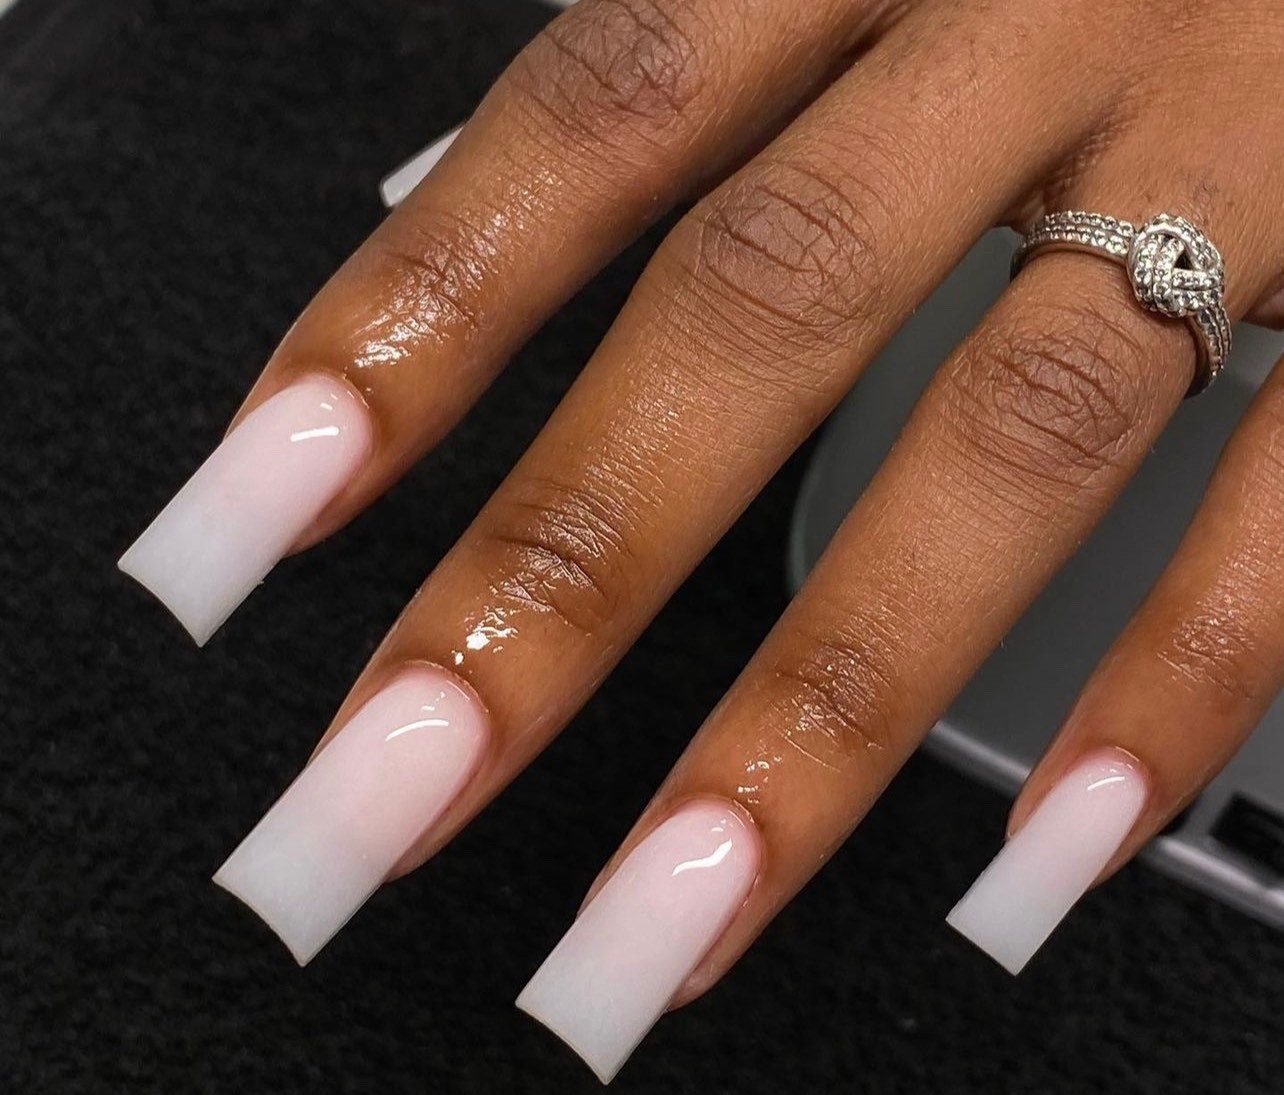 Glossy Pearl White False Nails with Glitter | The Nailest